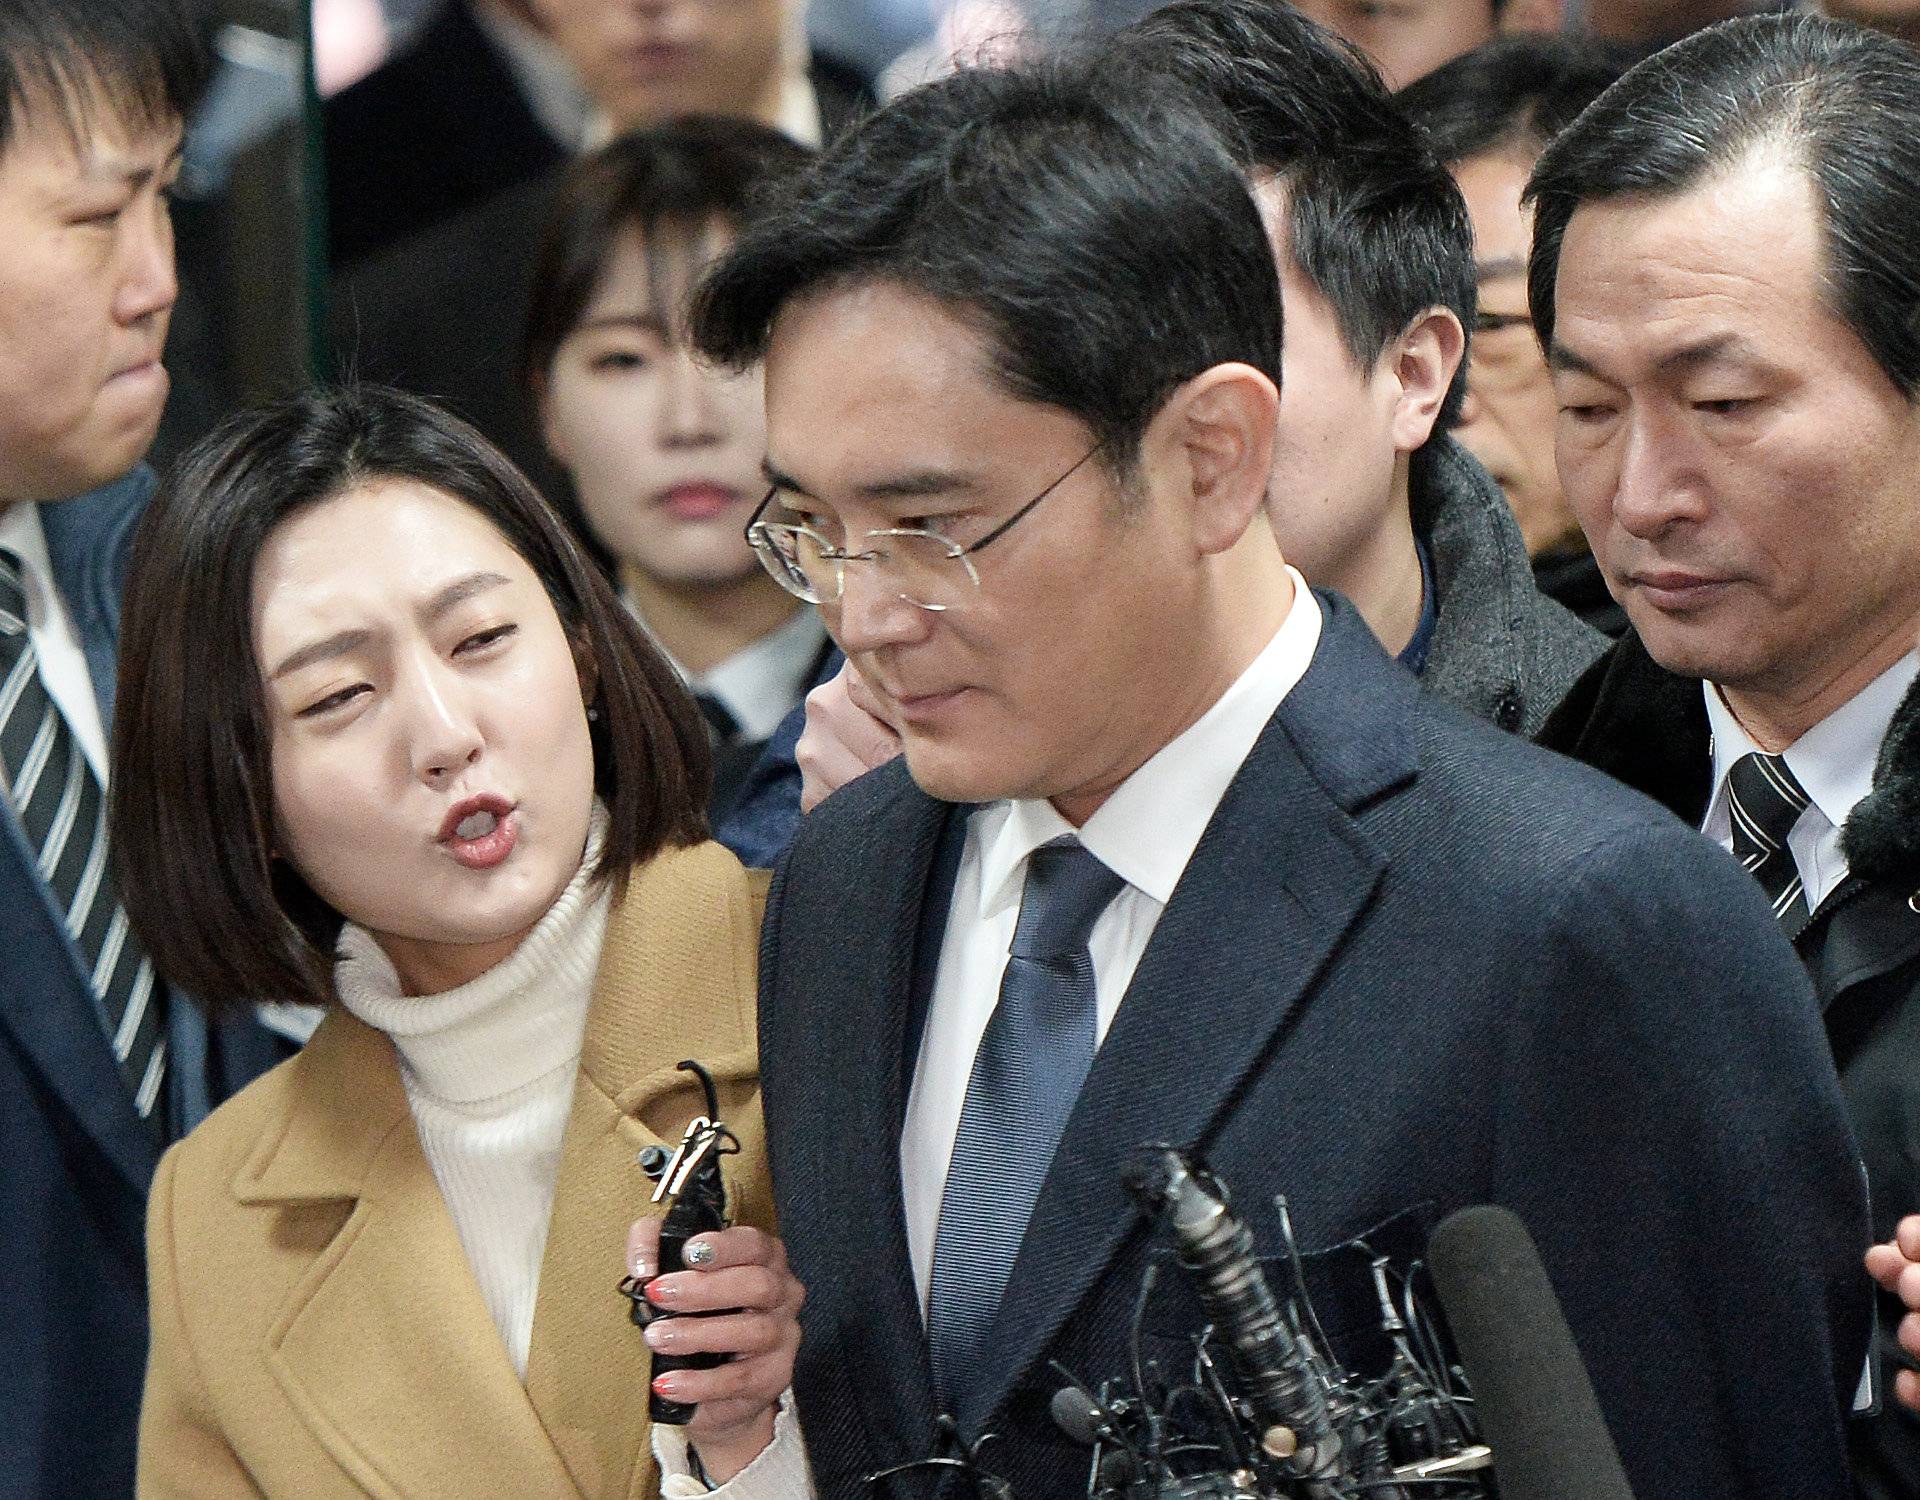 Samsung Group chief, Jay Y. Lee, is surrounded by media upon his arrival to the Seoul Central District Court in Seoul